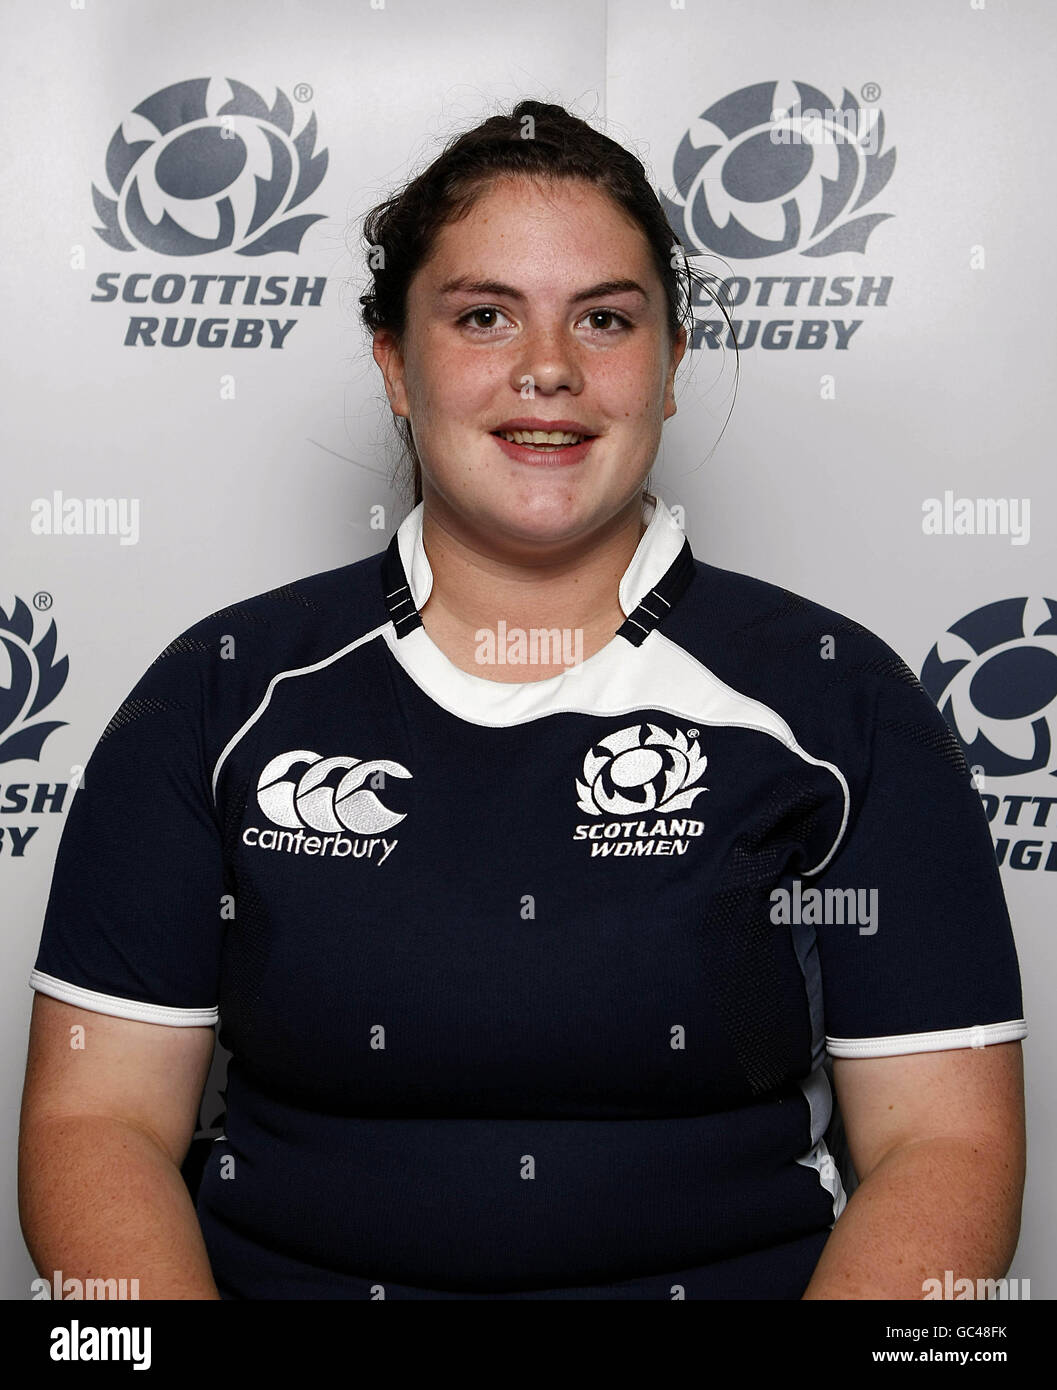 Rugby Union - Scotland Women's National Rugby Team - Photocall. Lindsey Smith, Schottland Stockfoto